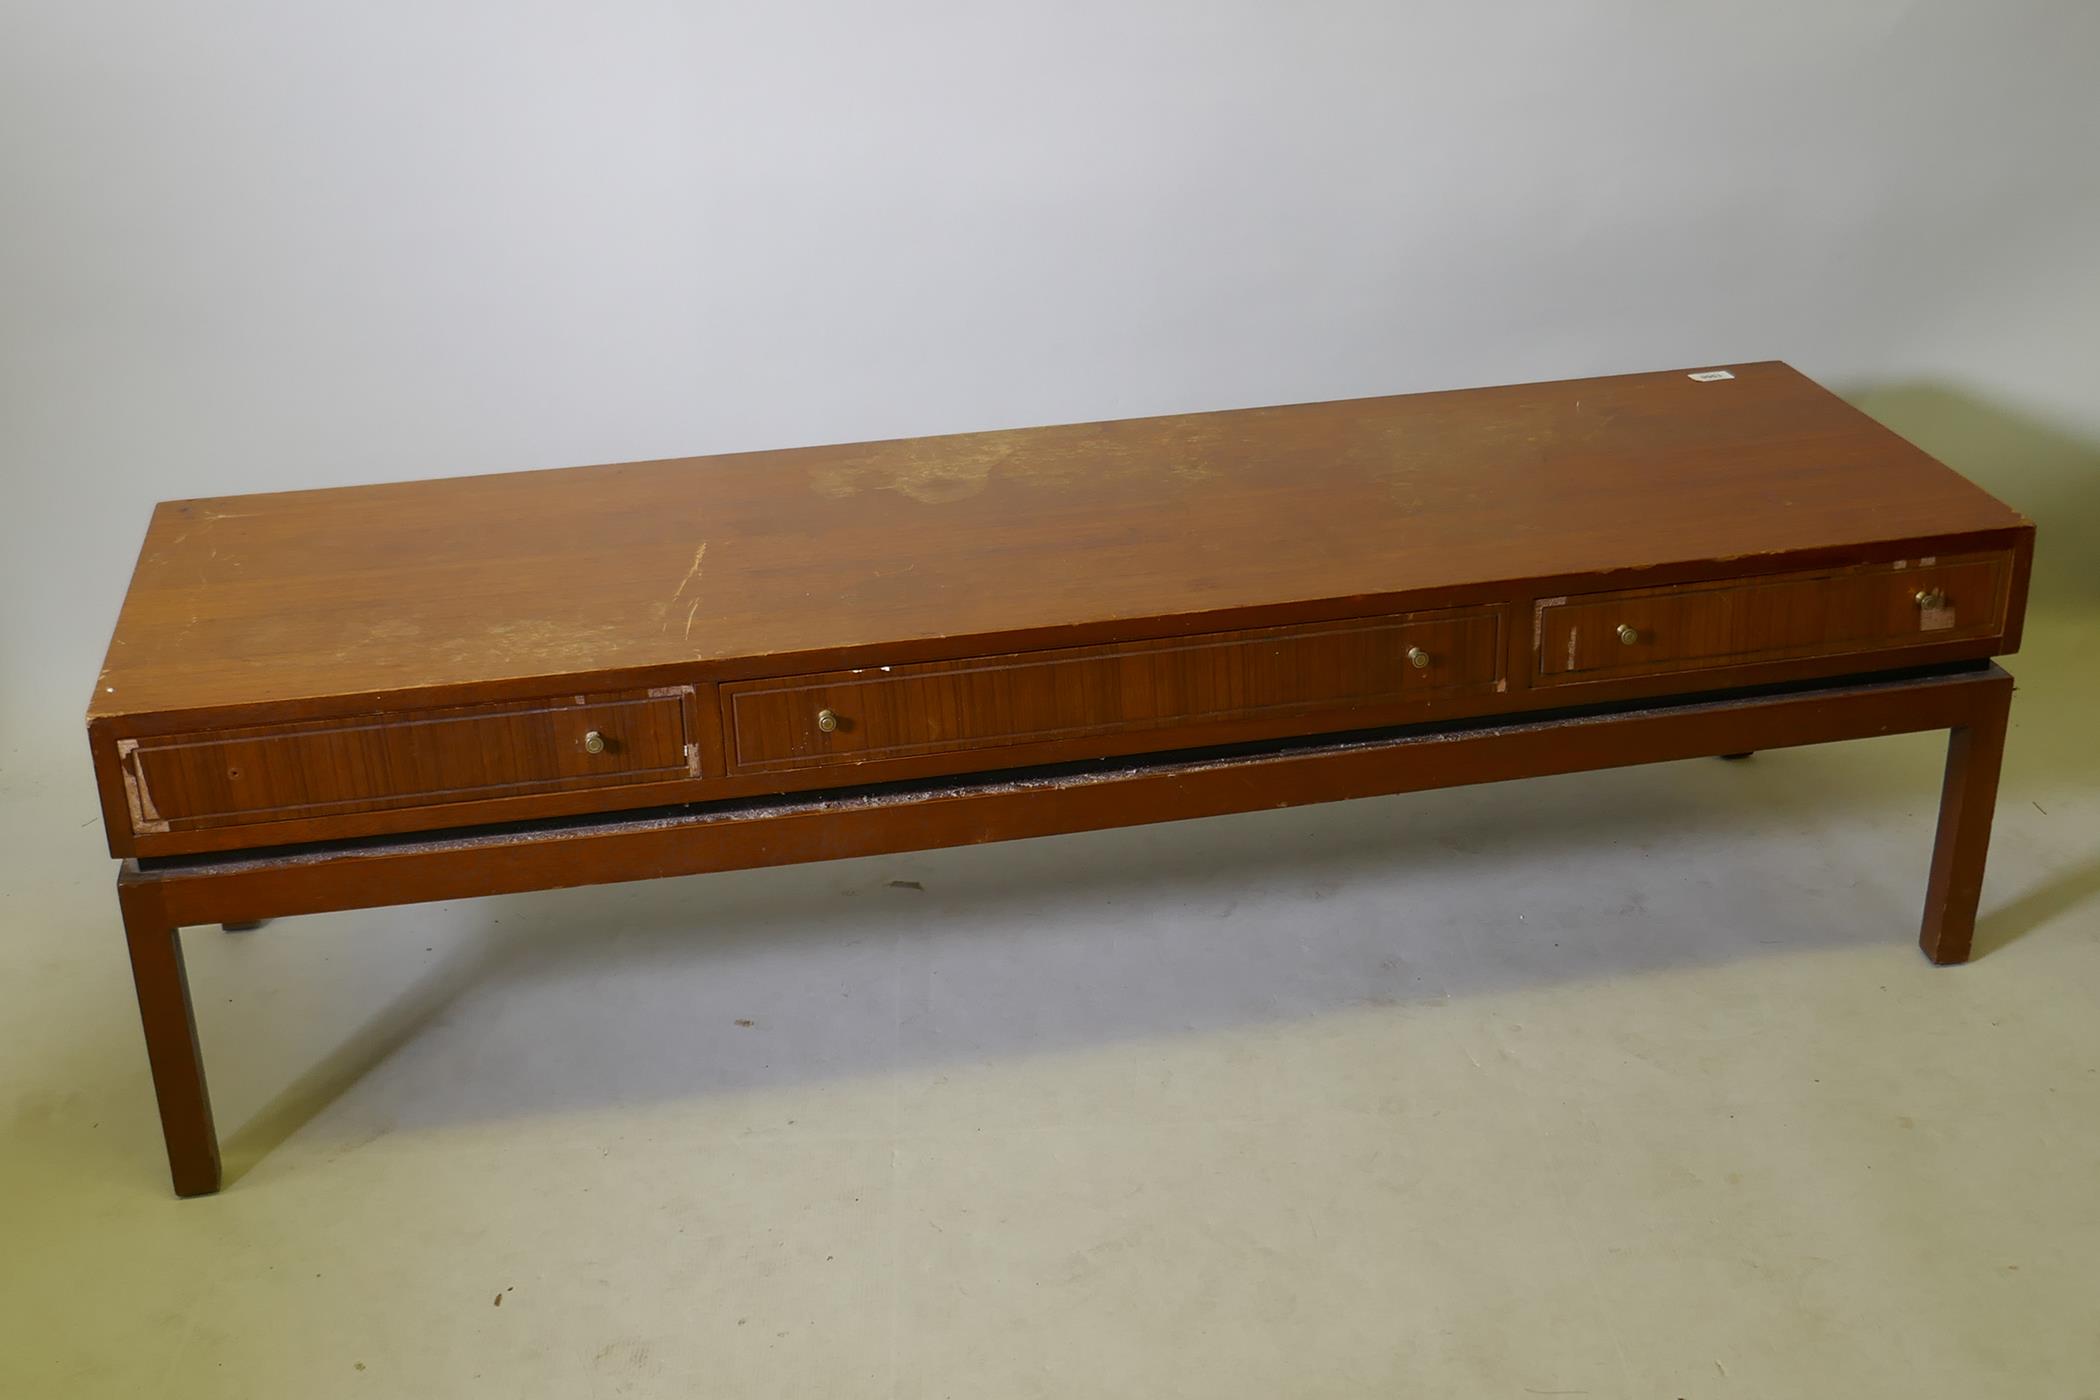 A mid century teak low table with three push/pull drawers, 59" x 18" x 16" - Image 4 of 5